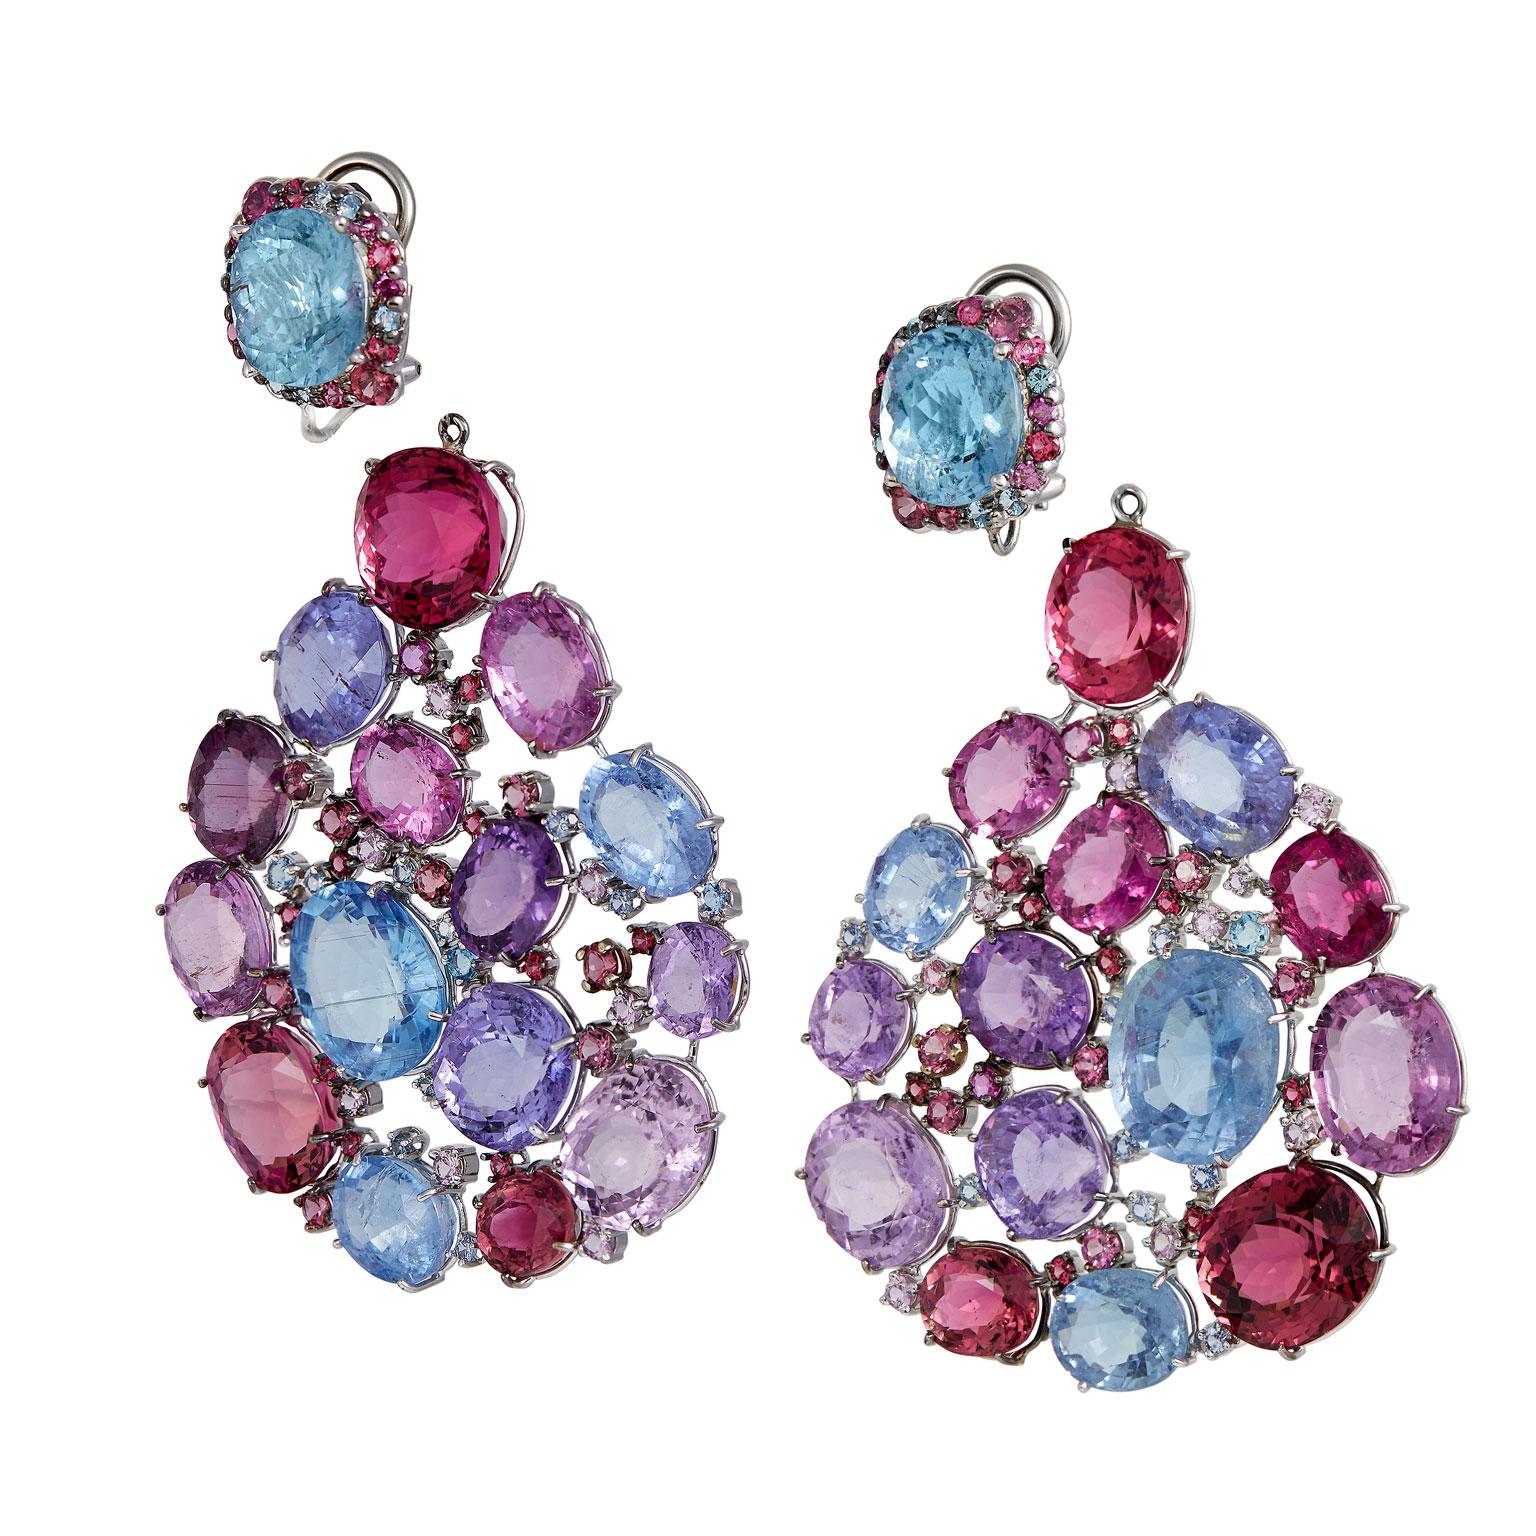 Pariba Tourmaline, Diamonds, Sapphires, Aquamarine, Spinel & Ruby Earrings 18k In New Condition For Sale In Naples, FL